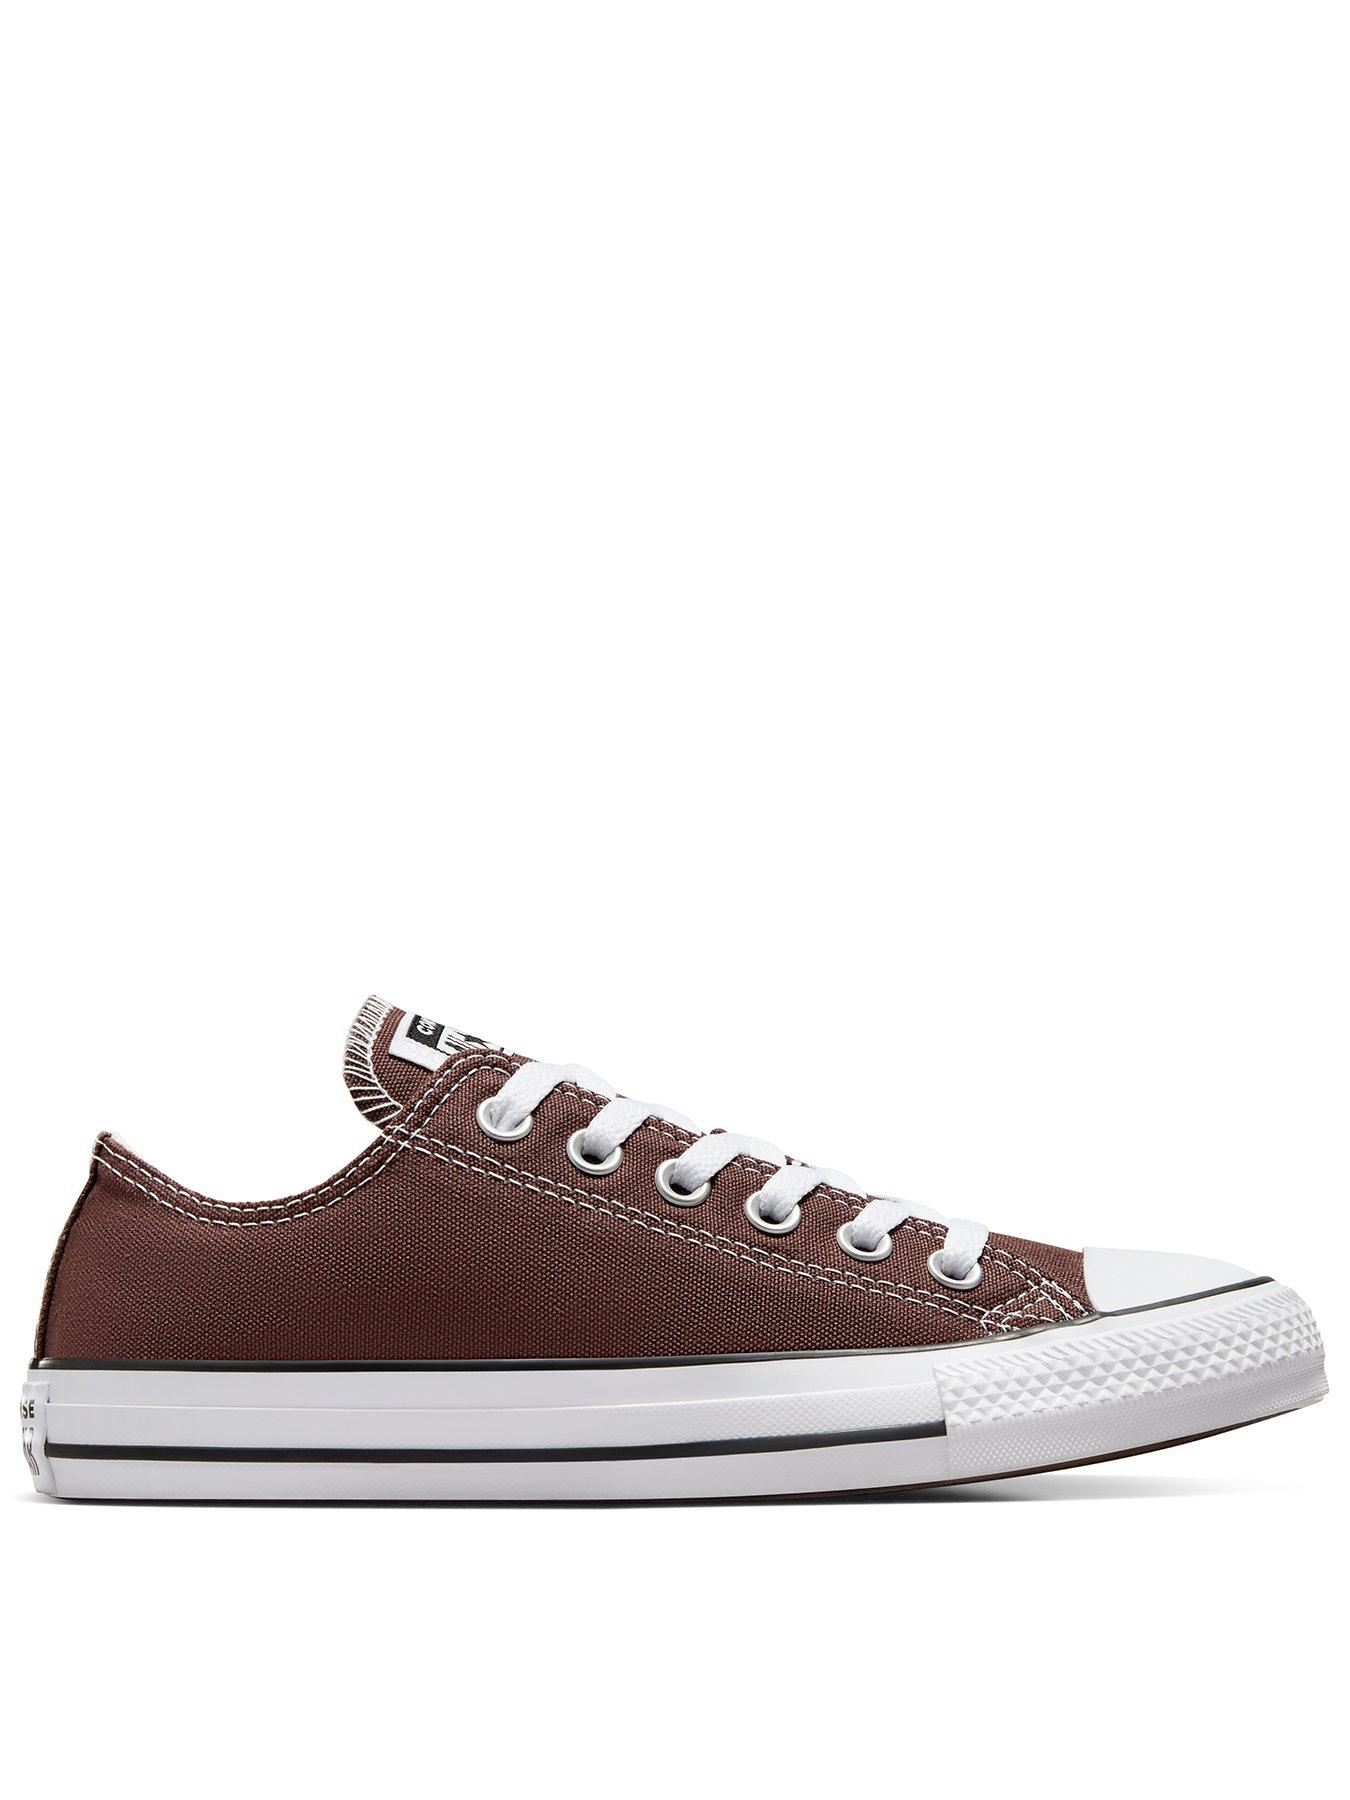 Mens Brown Converse All Star Hi Faux Leather Trainers